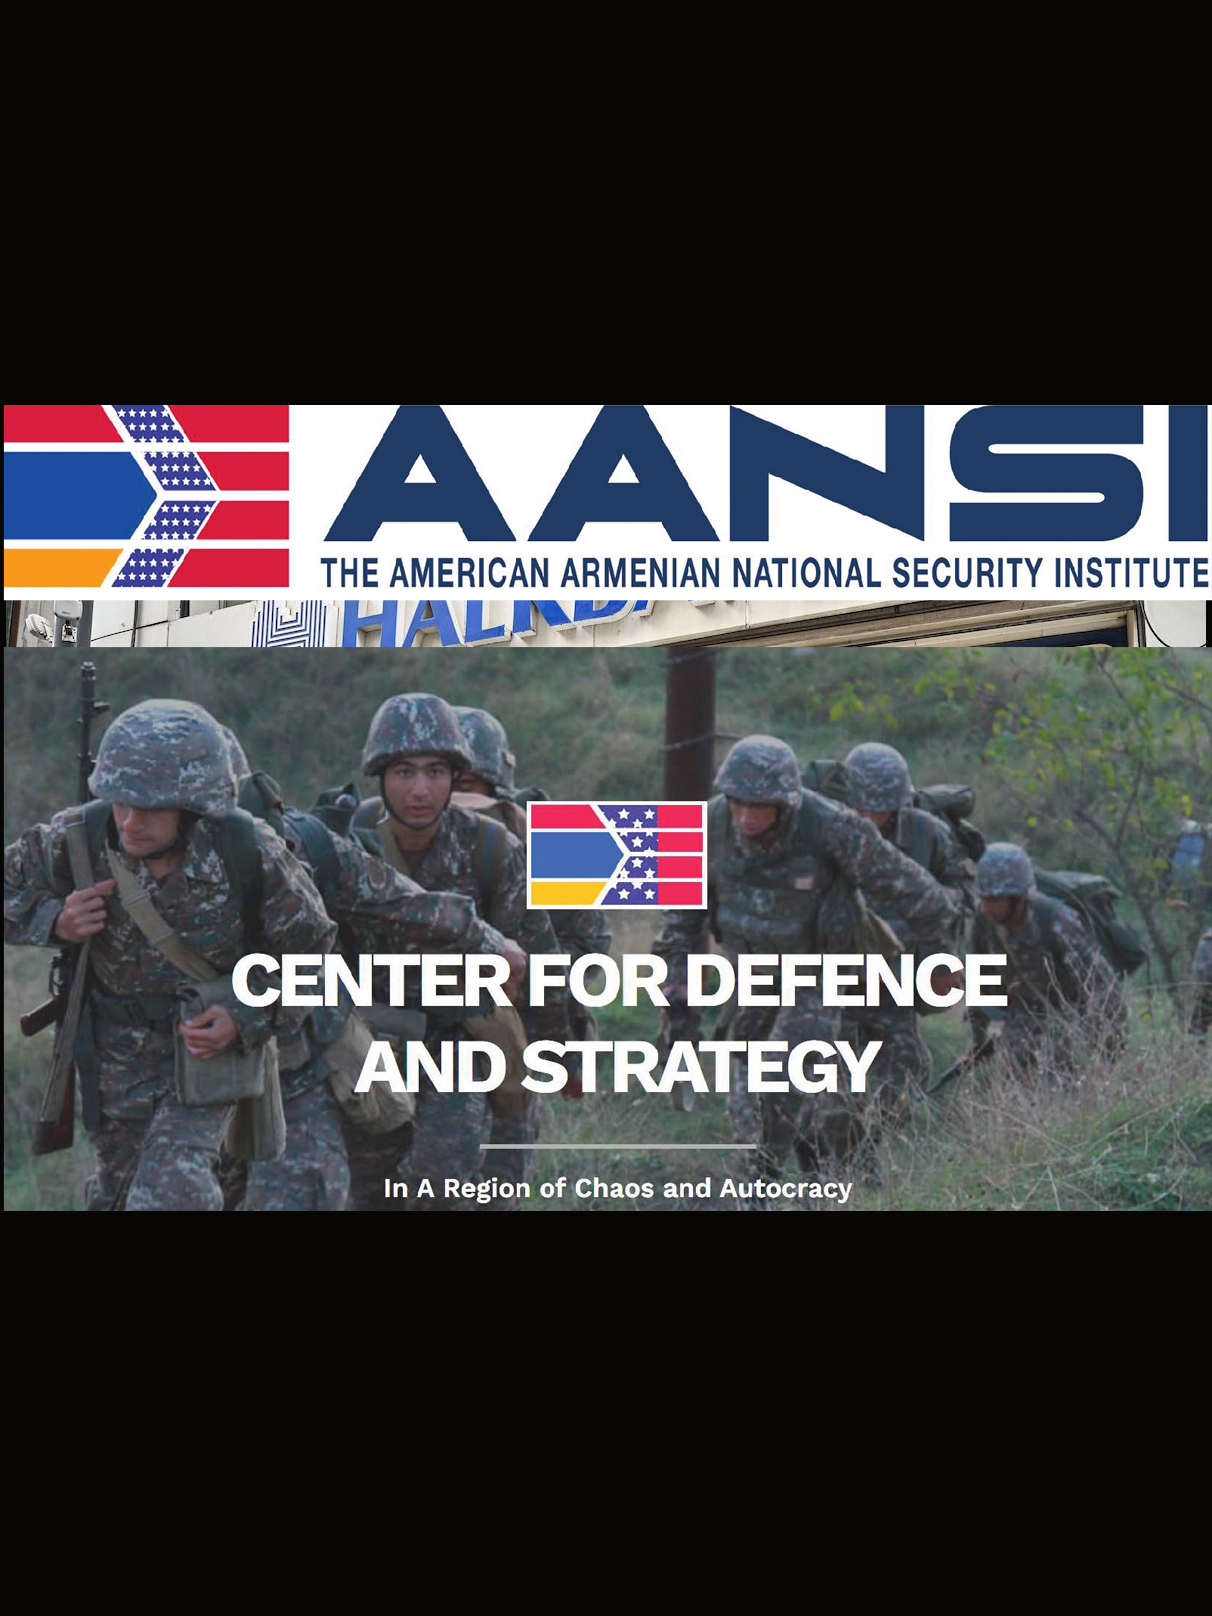 The American Armenian National Security Institute (AANS) Presents